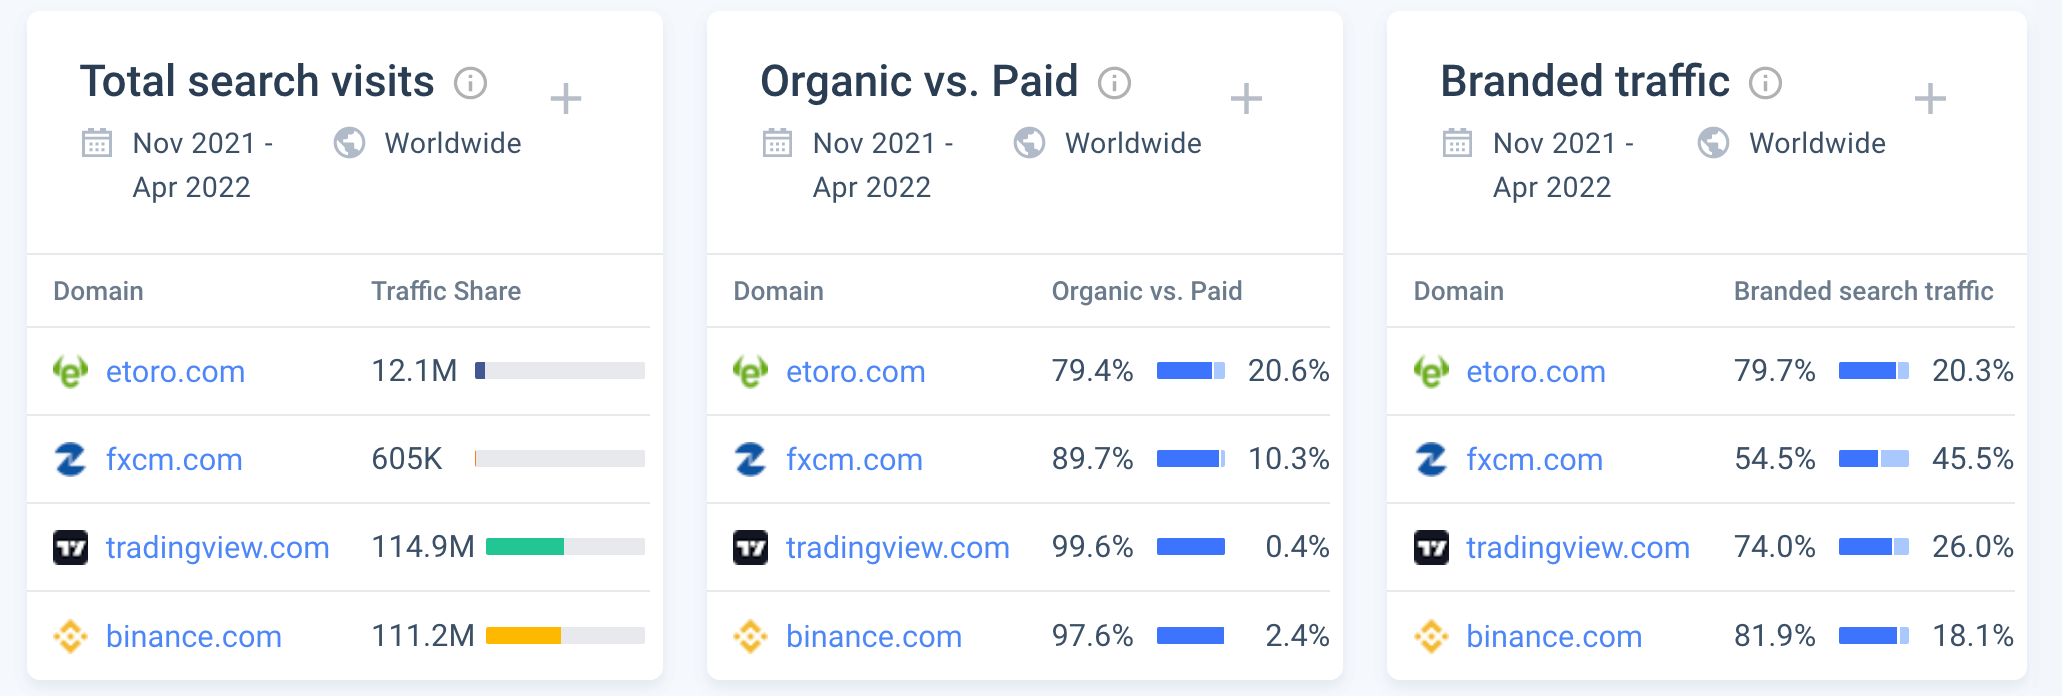 Breakdown of search visits, organic vs. paid and percentage of branded